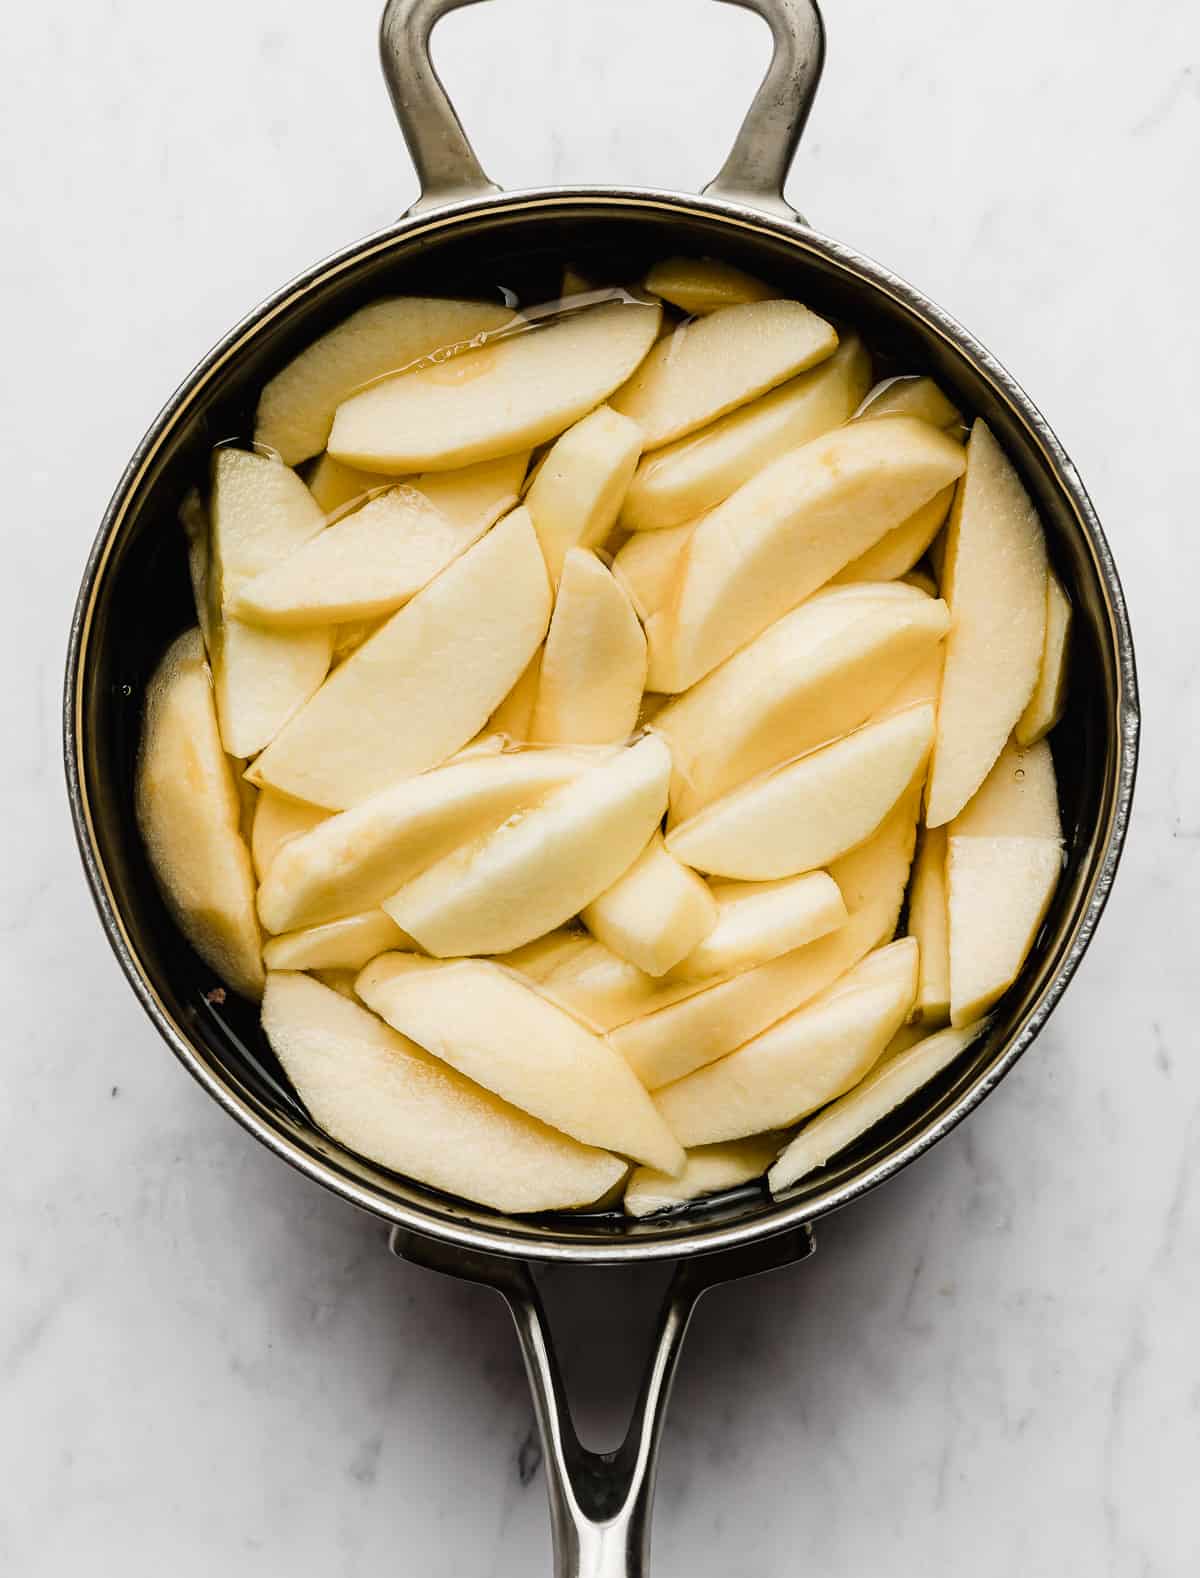 Peeled and sliced apples in a water filled saucepan.